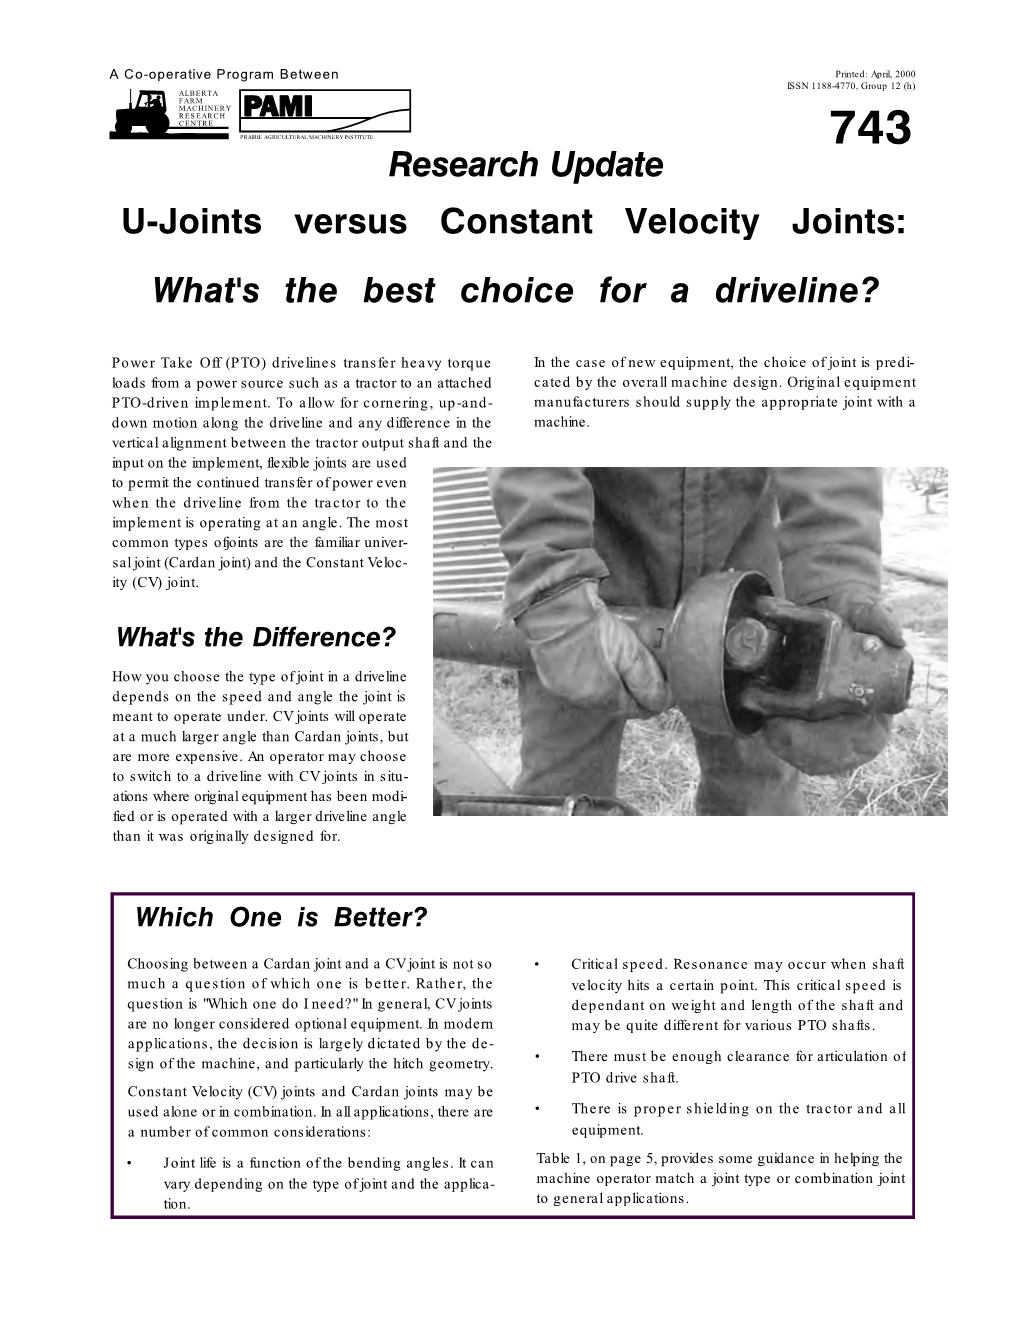 Research Update U-Joints Versus Constant Velocity Joints: What's the Best Choice for a Driveline?